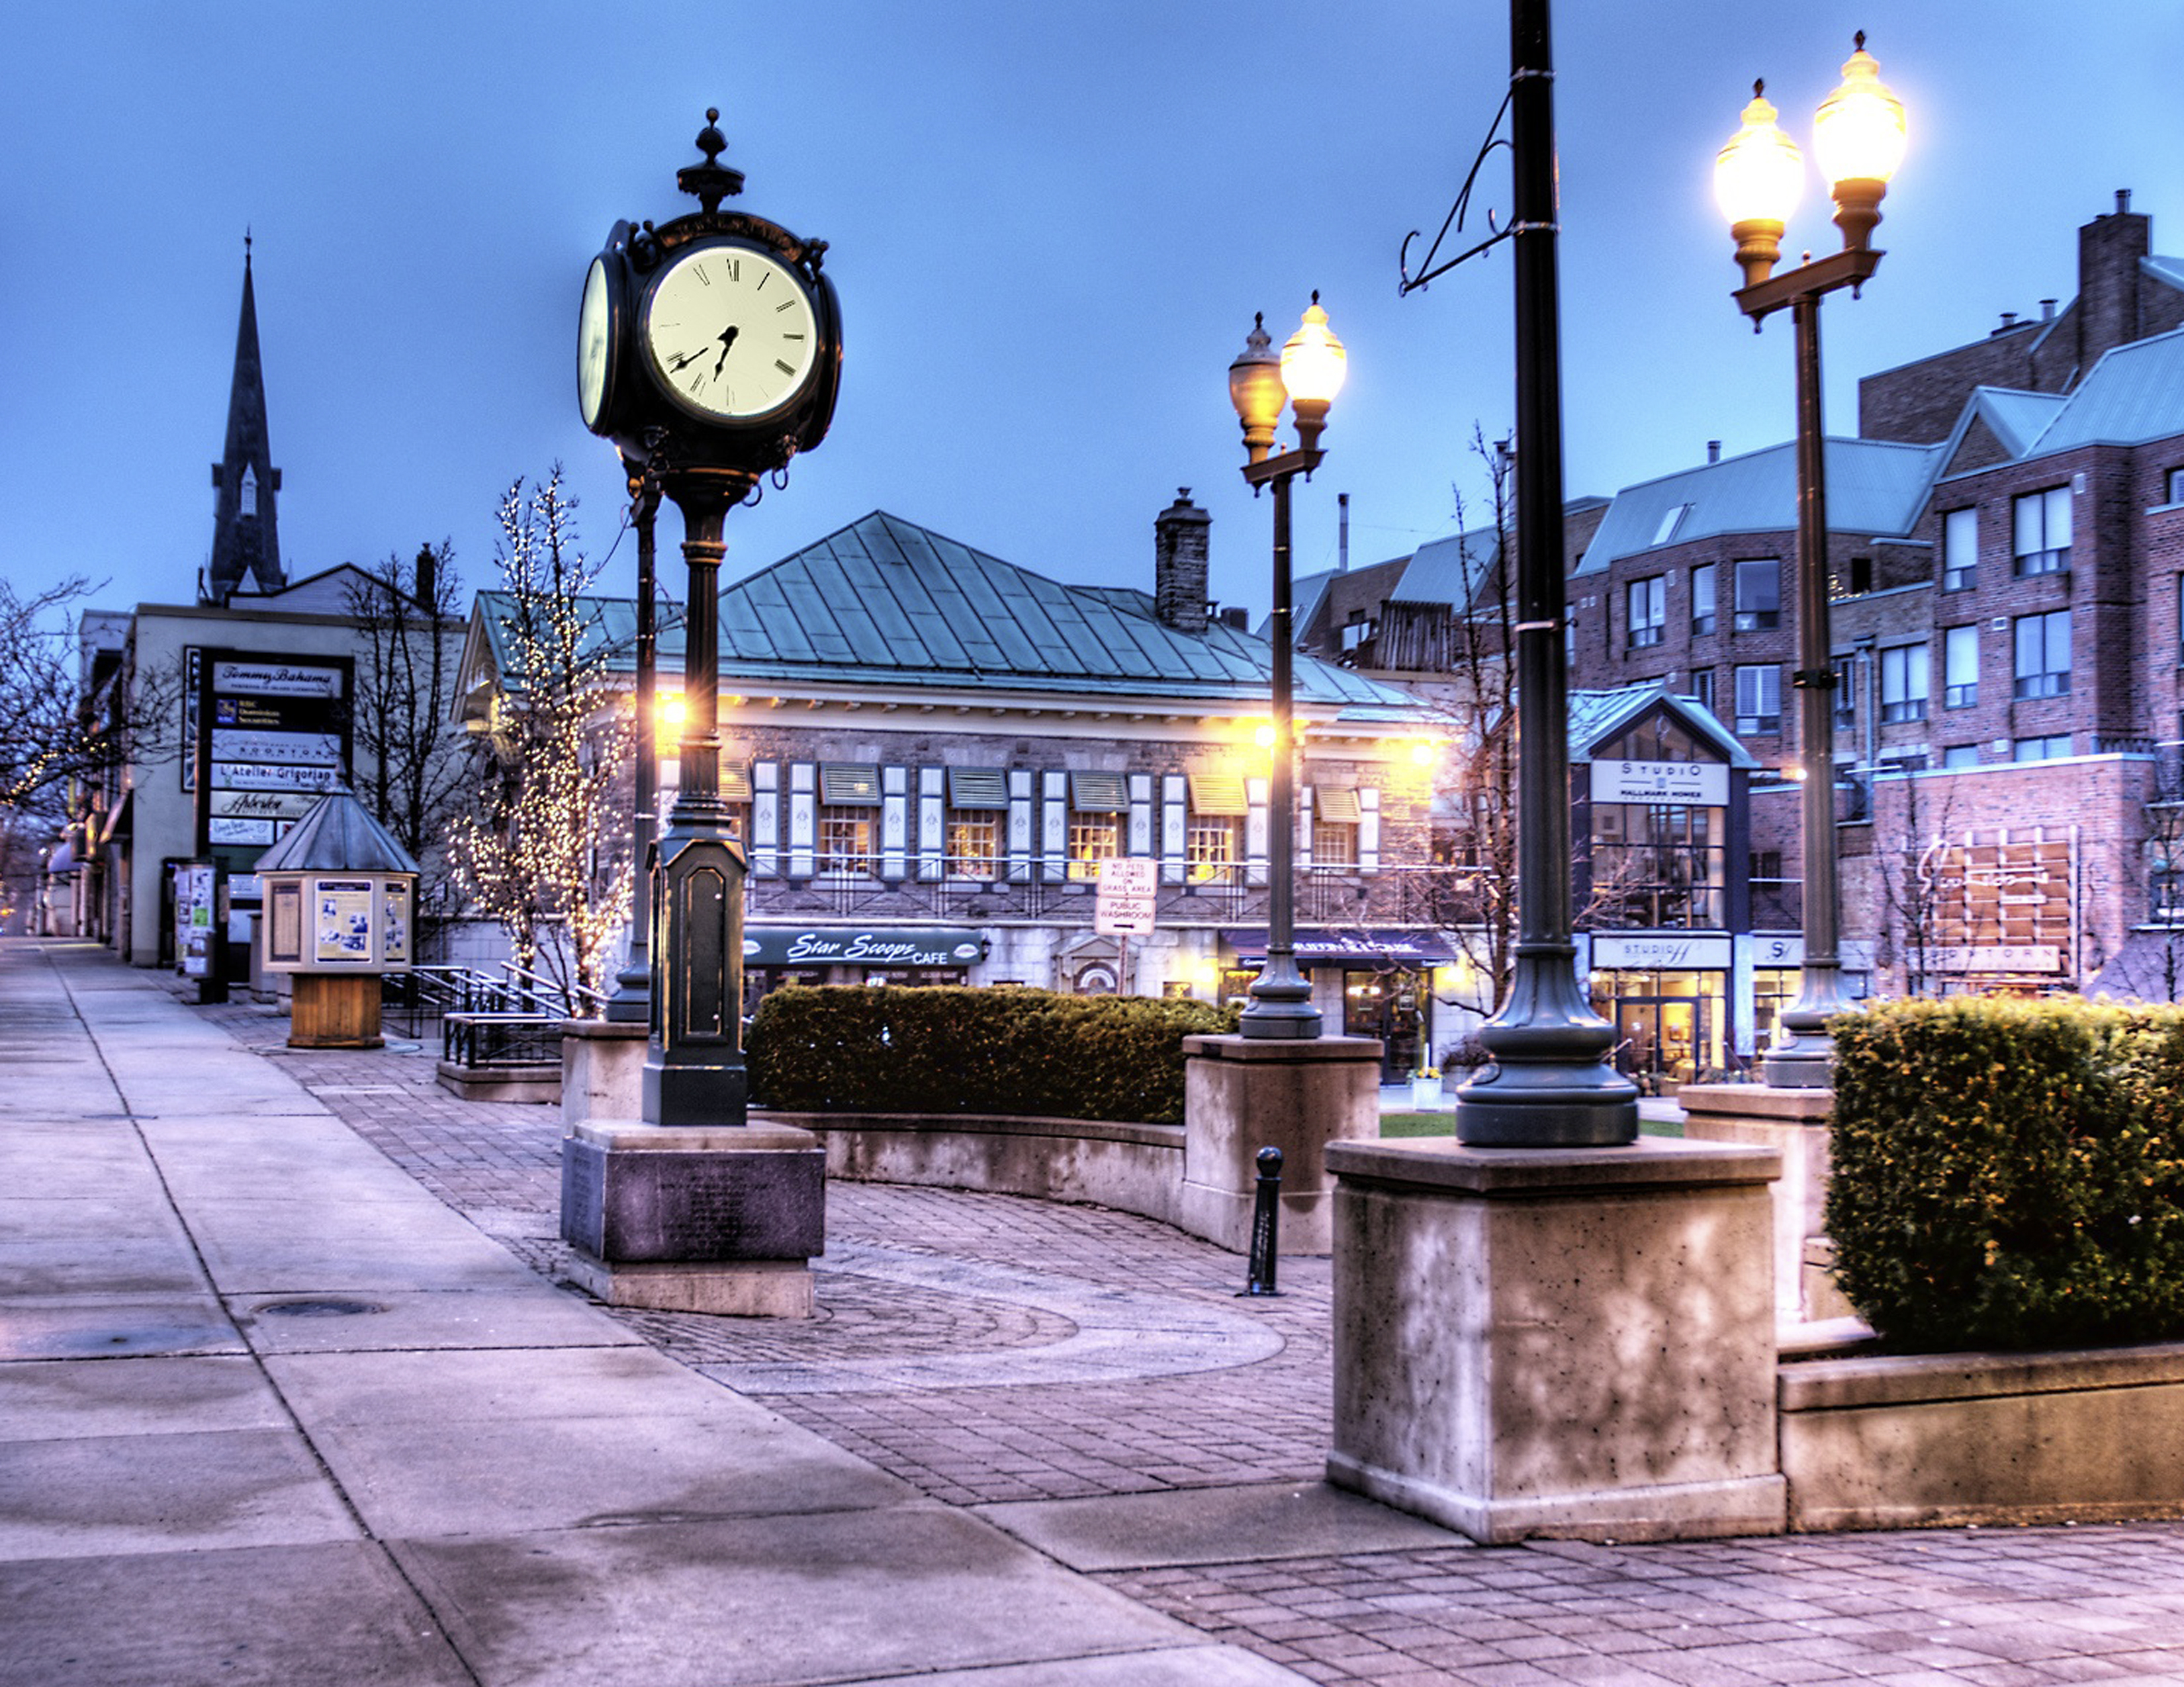 Downtown Oakville, Ontario with a grand clock.